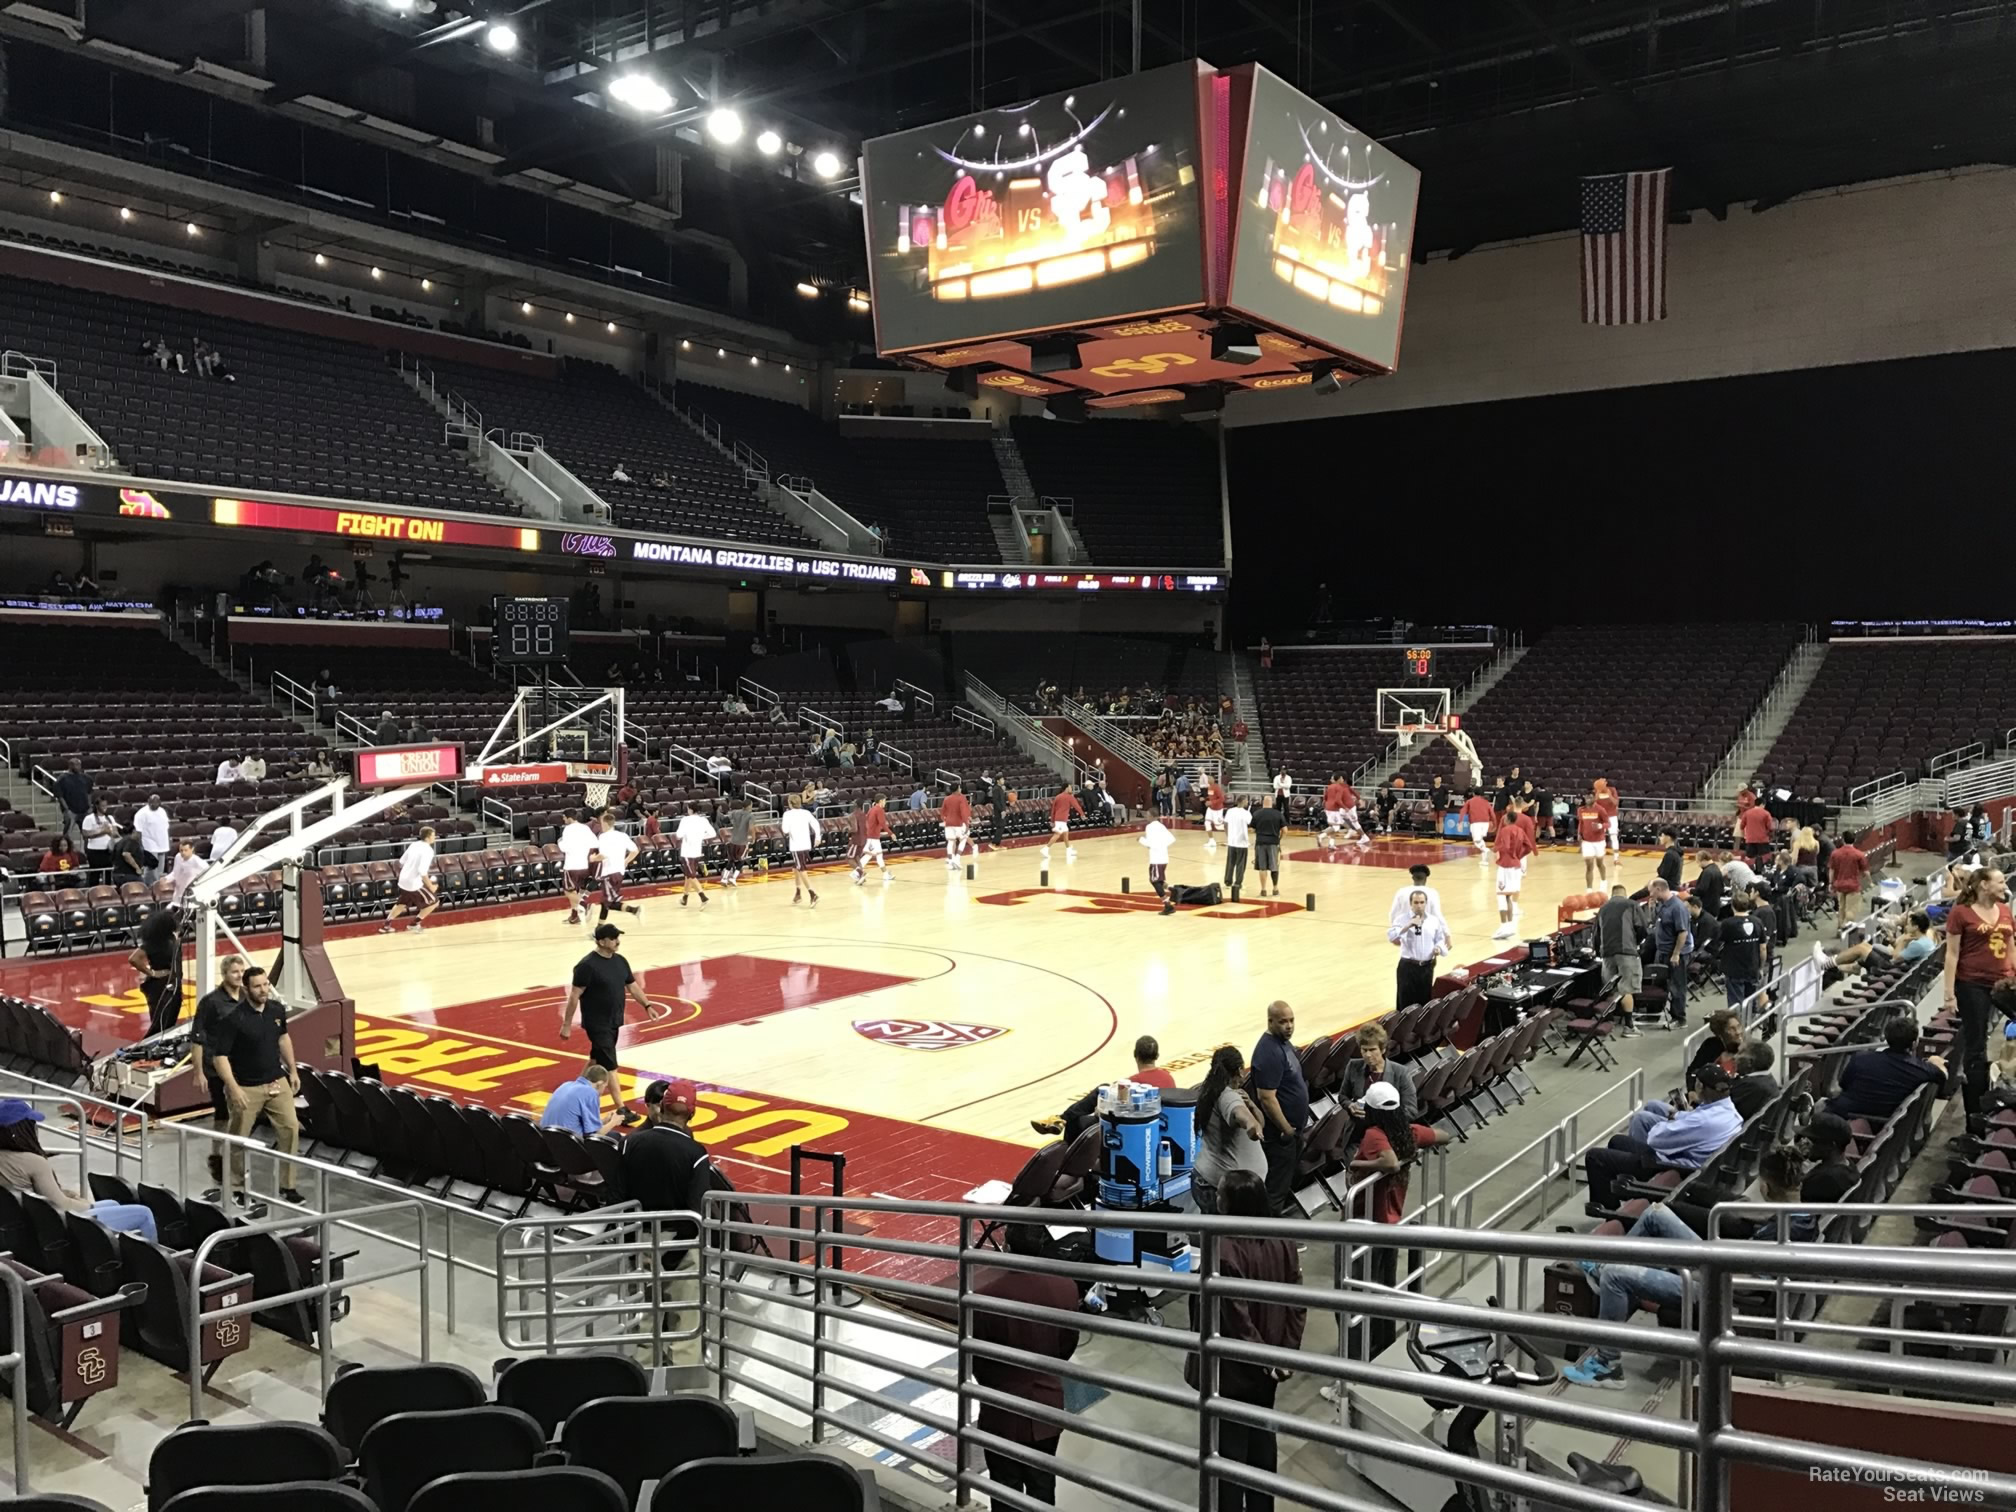 section 112, row 10 seat view  - galen center